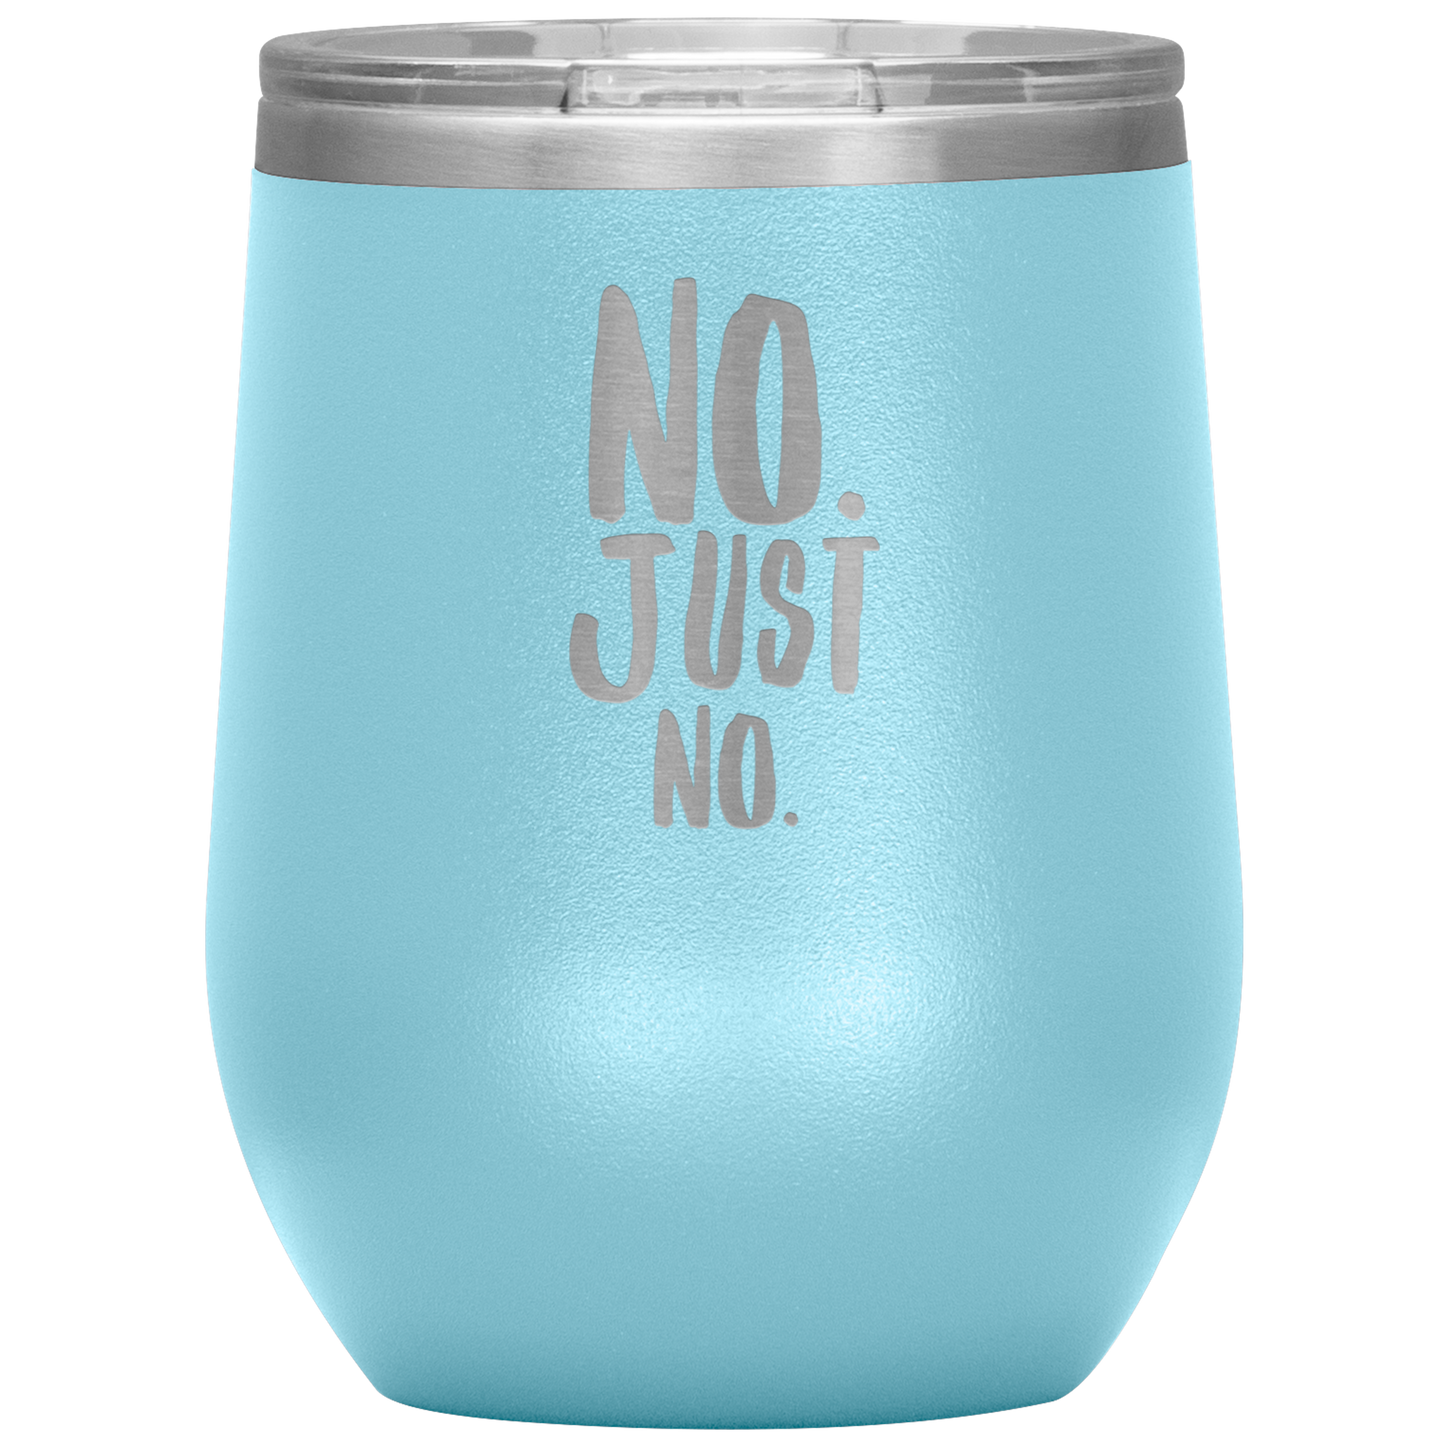 "No. Just No." 12 oz. Insulated Stainless Steel Wine Tumbler with Lid